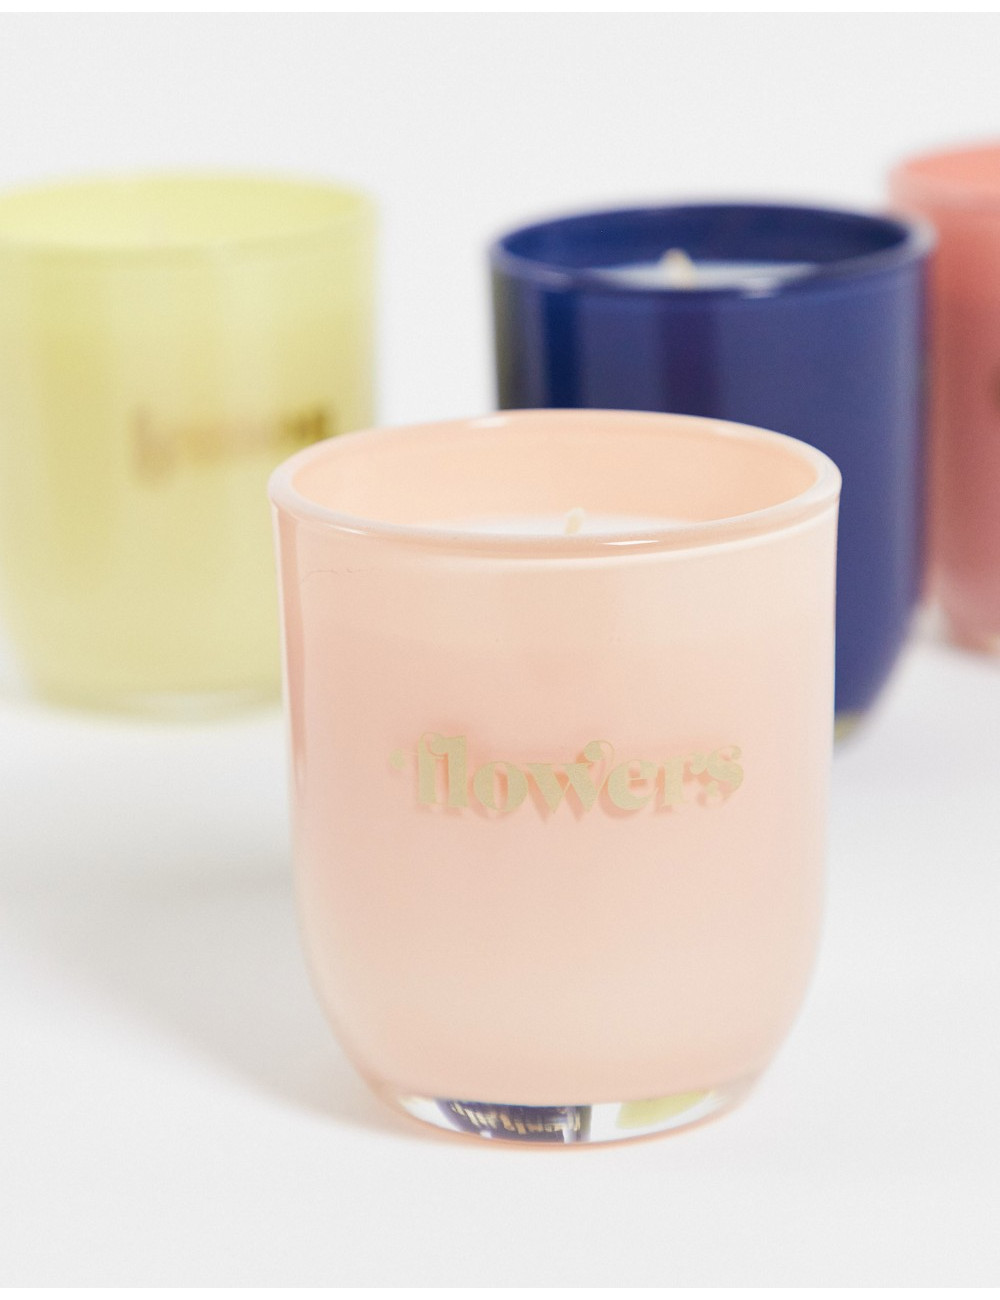 Paddywax Petite Flowers Candle